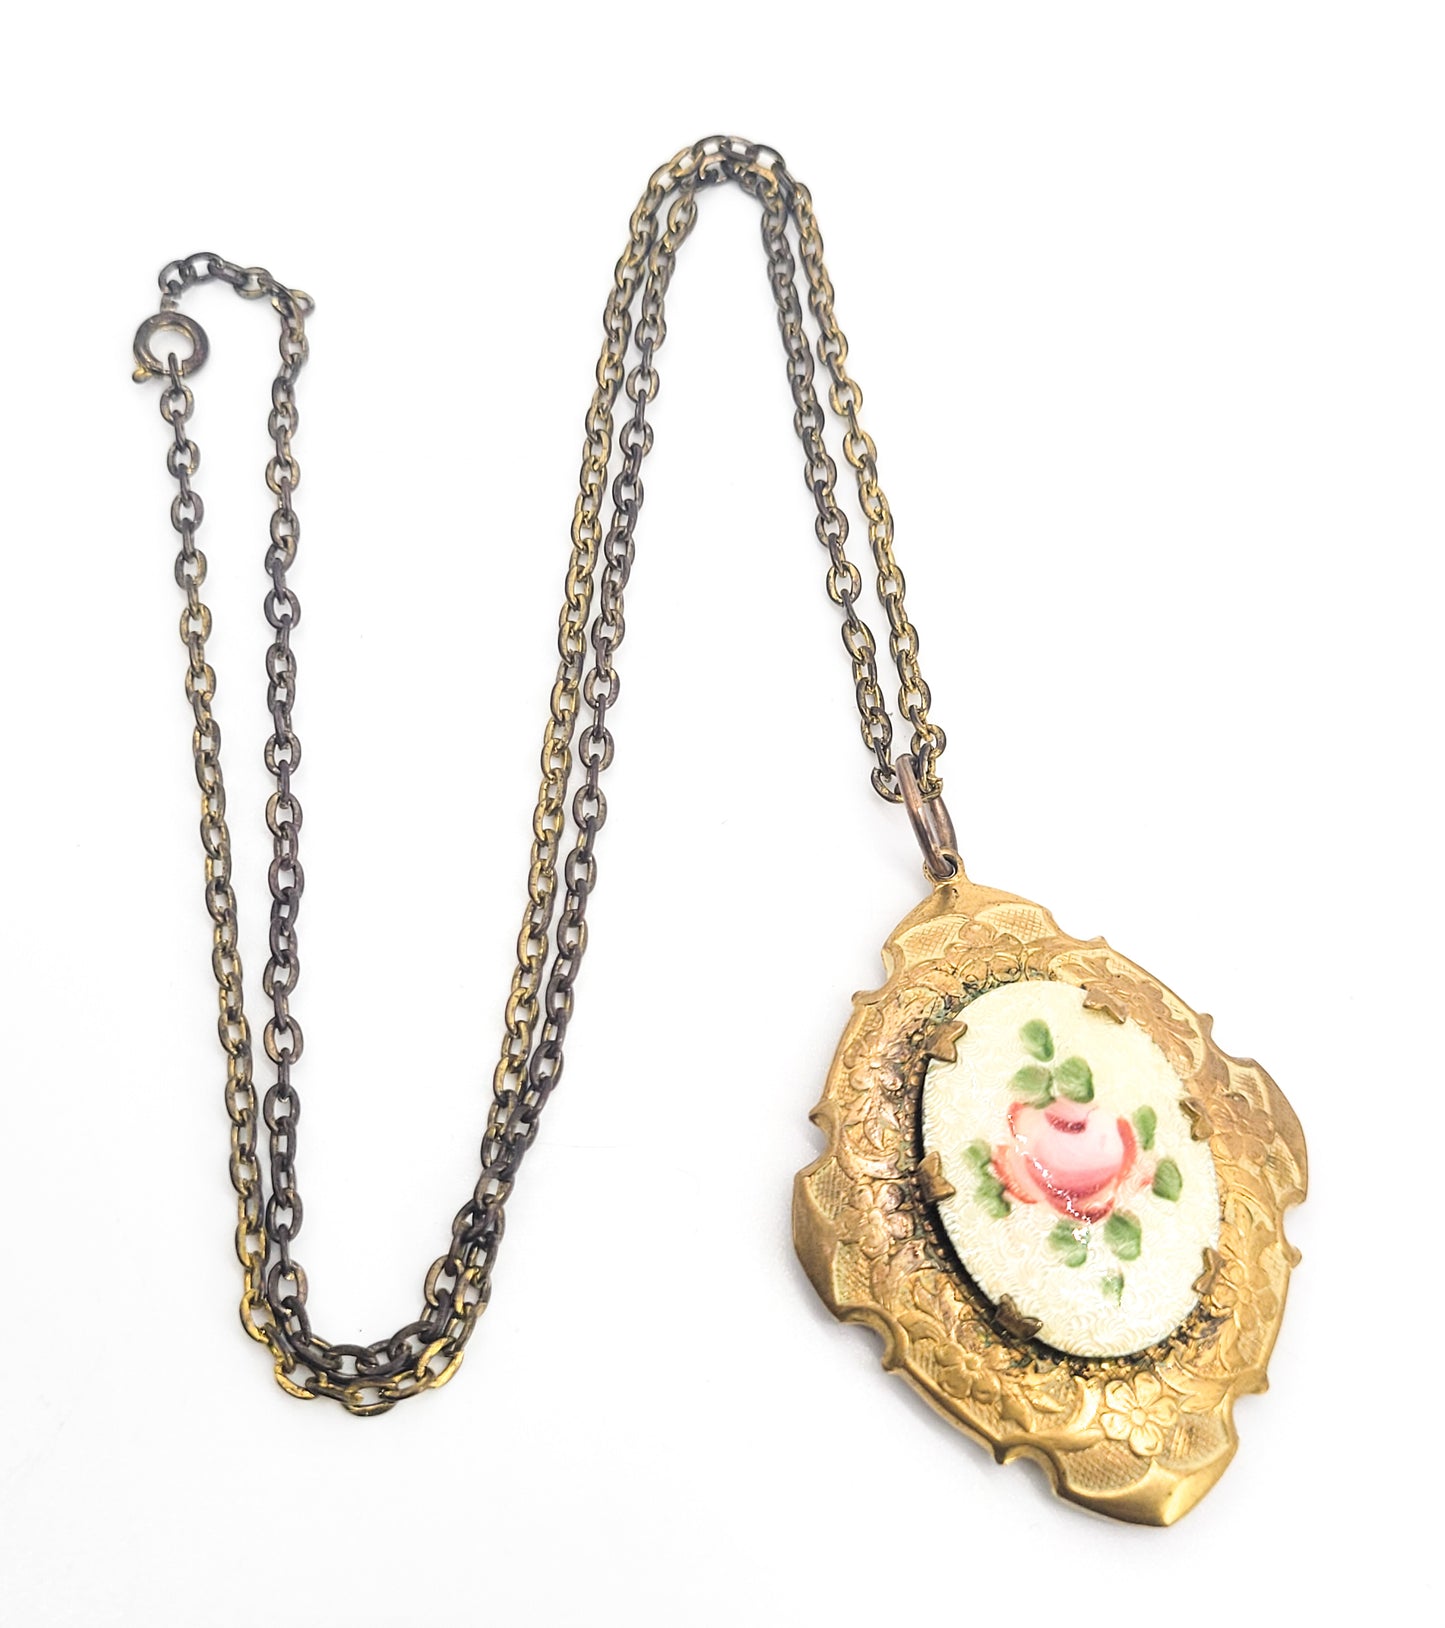 Guilloche locket with Pink cabbage rose mid century enamel locket necklace